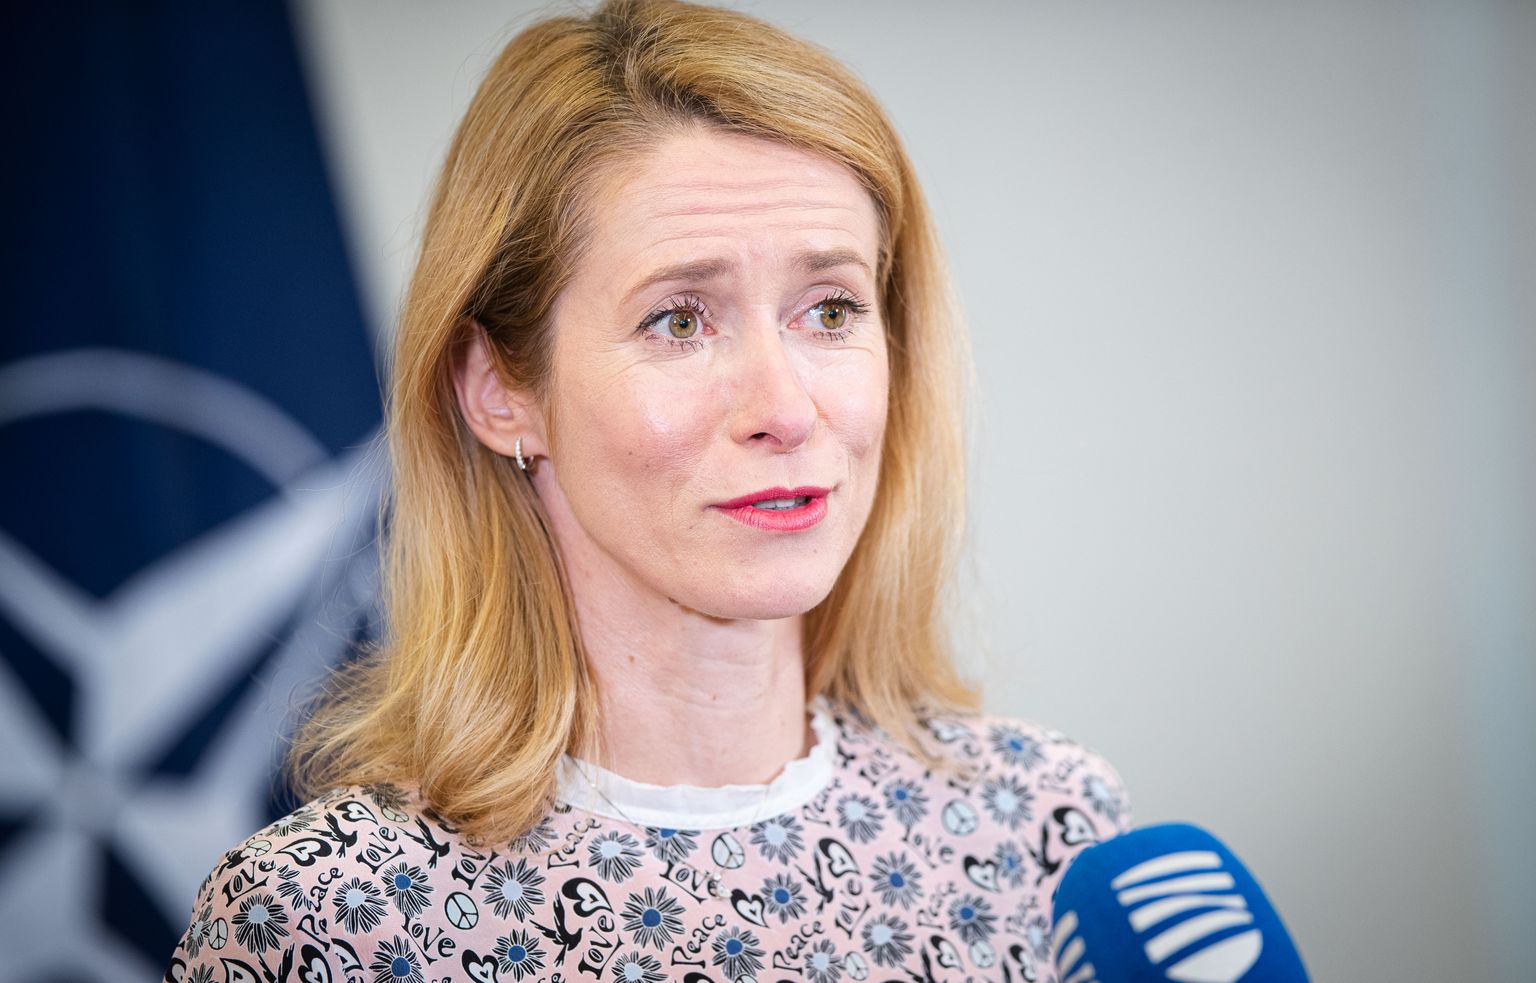 Estlands premiärminister Kaja Kallas, leader of the Reform Party, announced on Friday afternoon that she has made a proposal to the president to dismiss Center Party ministers.